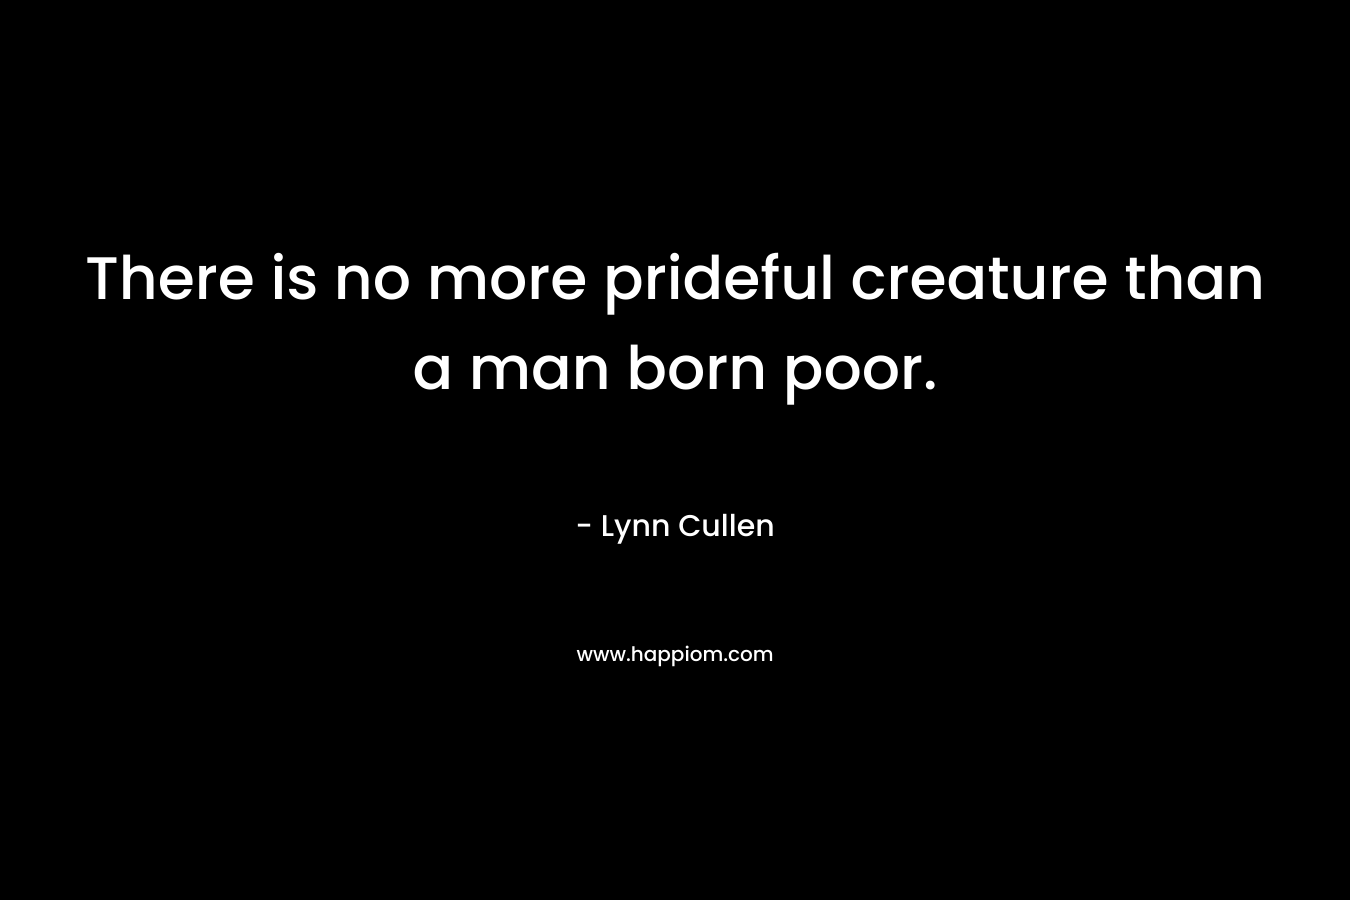 There is no more prideful creature than a man born poor. – Lynn Cullen